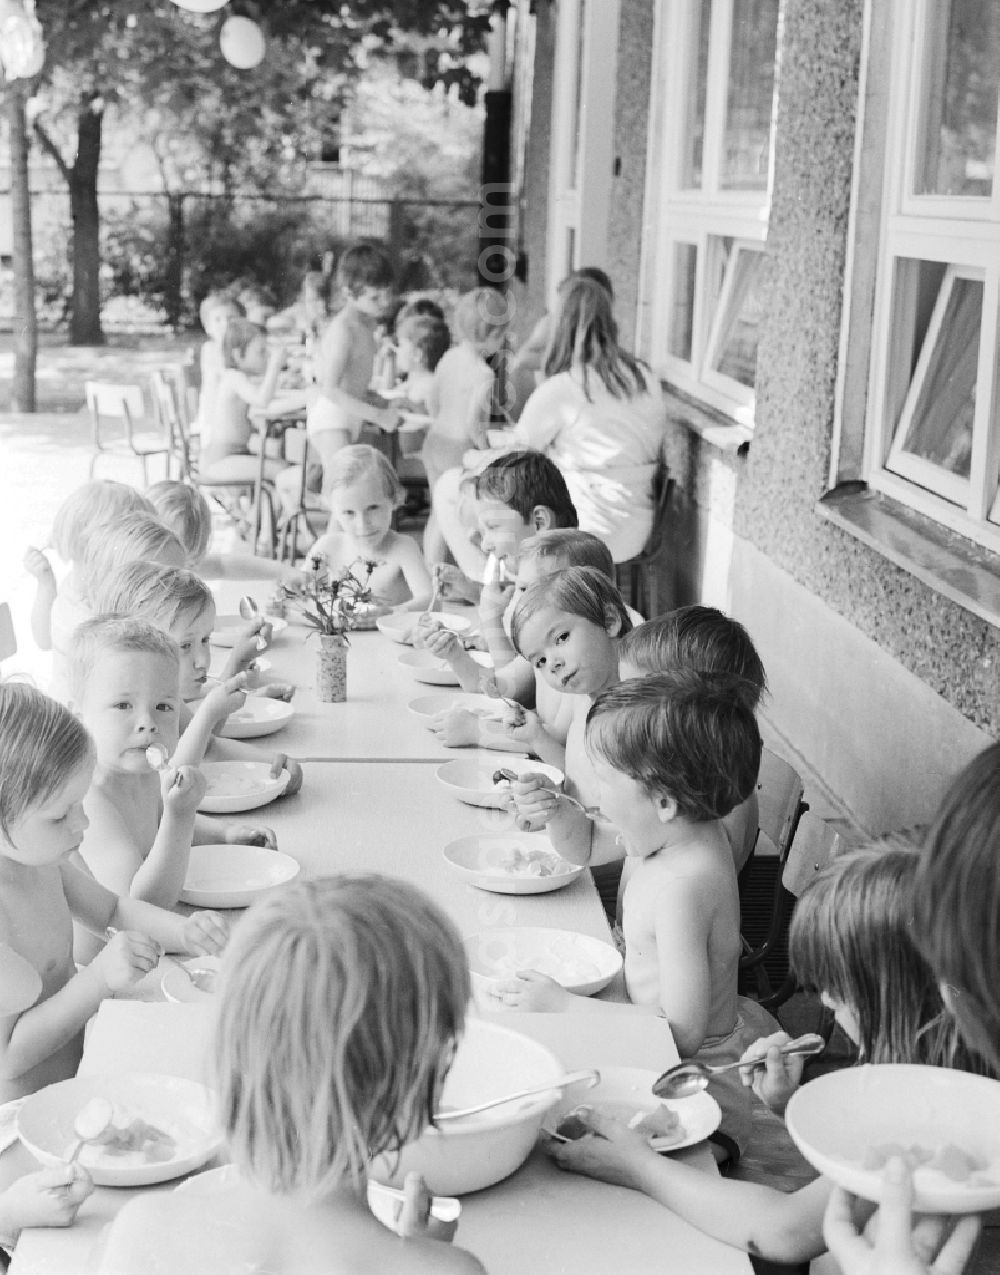 GDR photo archive: Berlin - Children celebrate the International Children's Day at a preschool in Berlin, the former capital of the GDR, German Democratic Republic. On this day there was always a festive program which consisted of sport and play. Here the Community lunch on the terrace